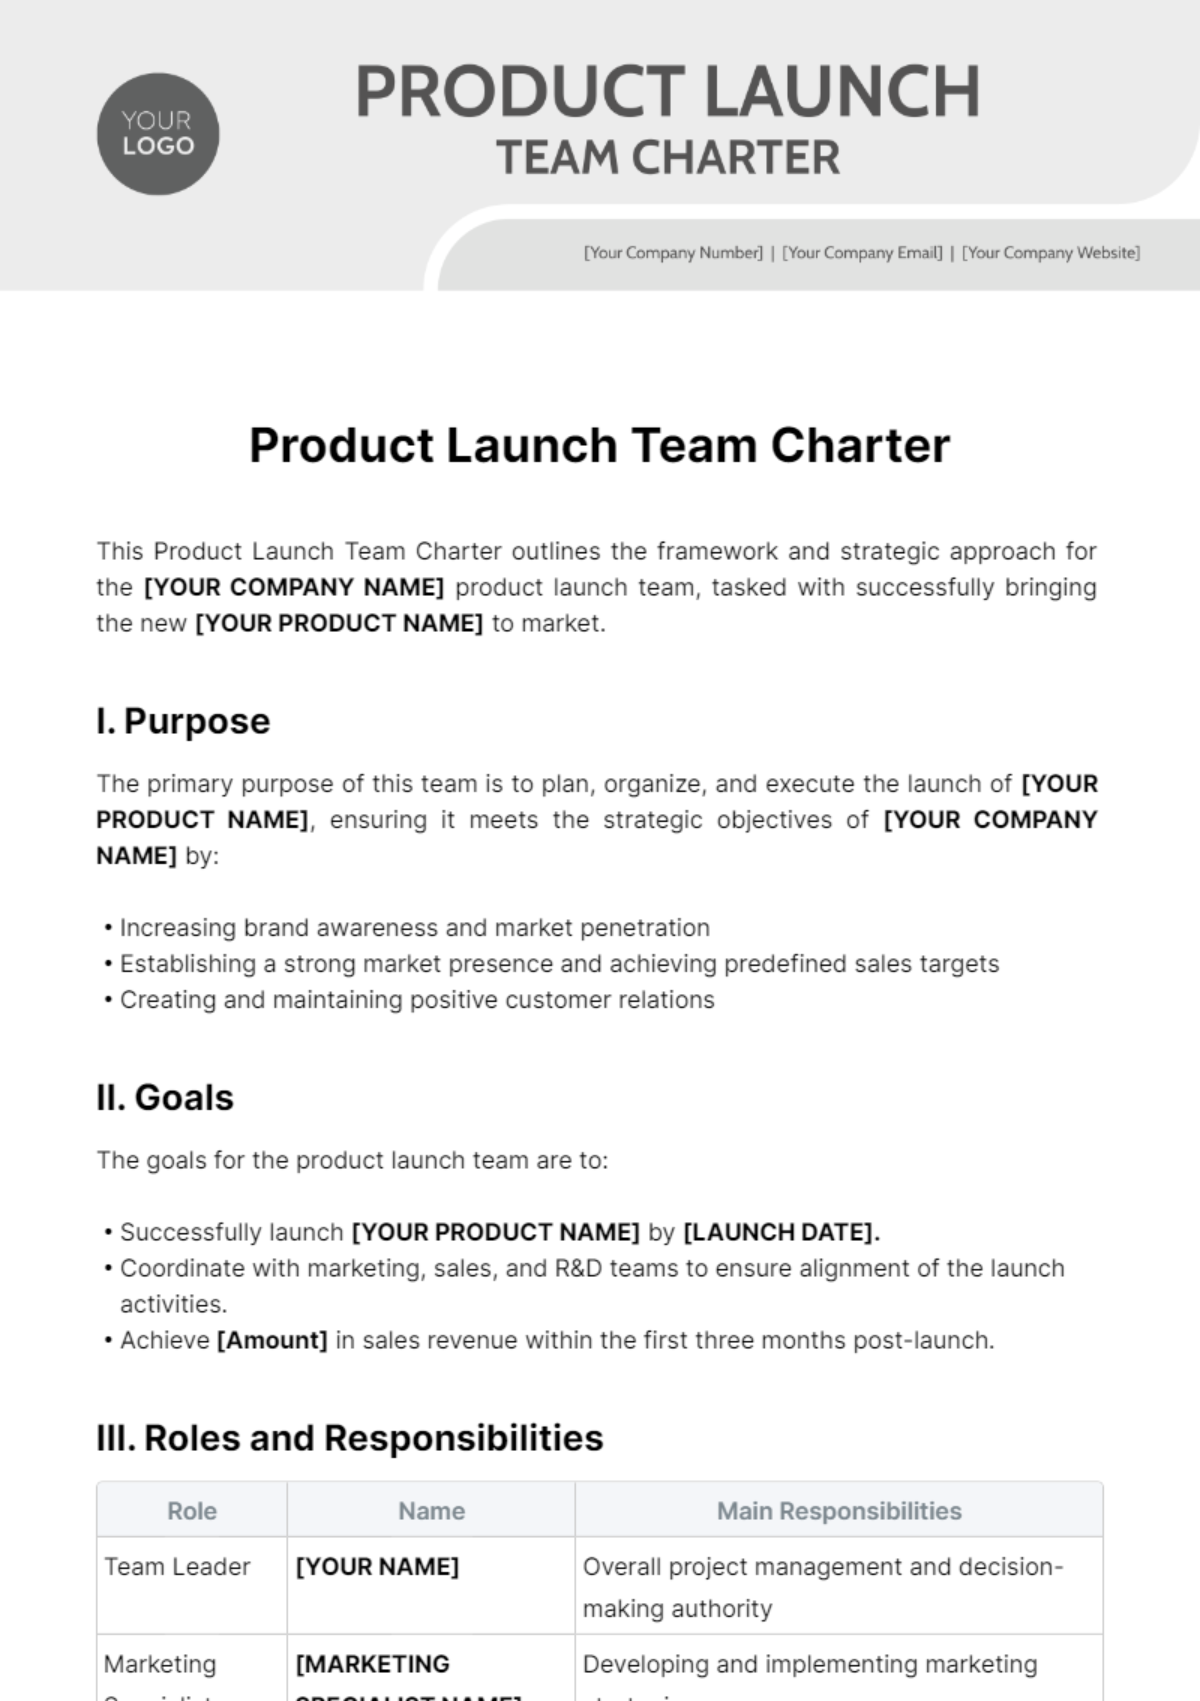 Product Lunch Team Charter Template